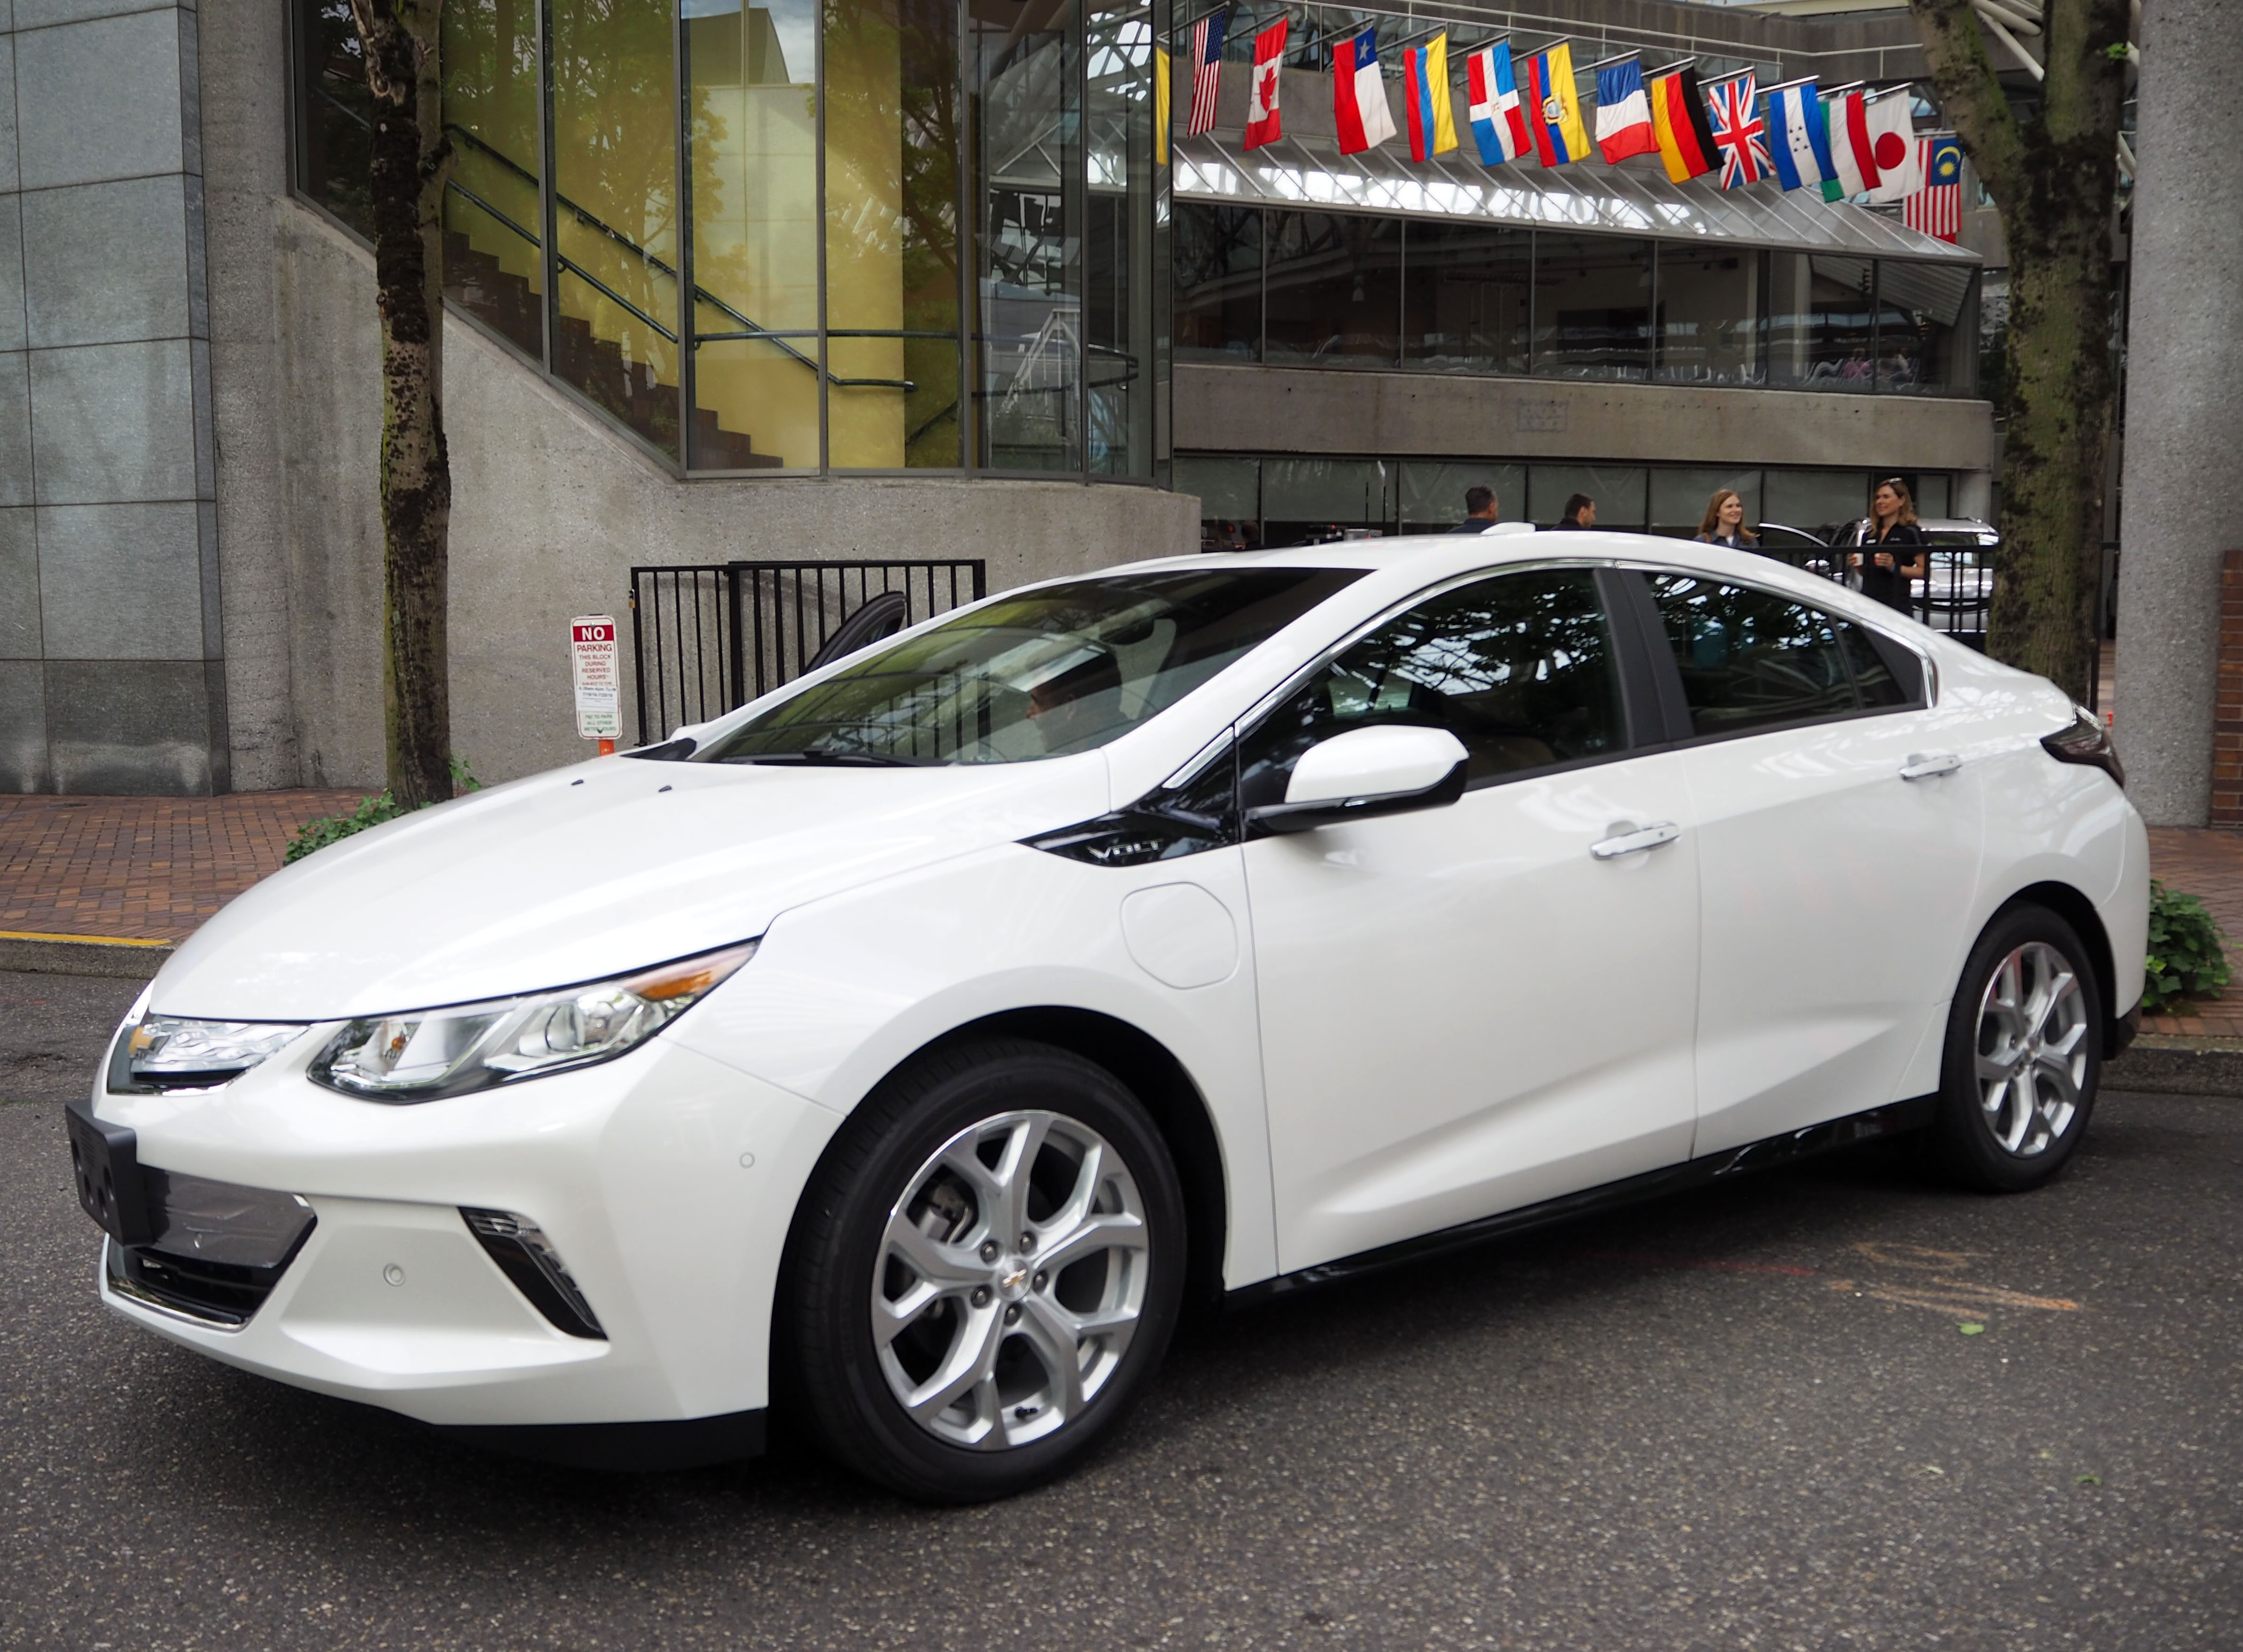 2017 chevy volt named northwest green vehicle of the year